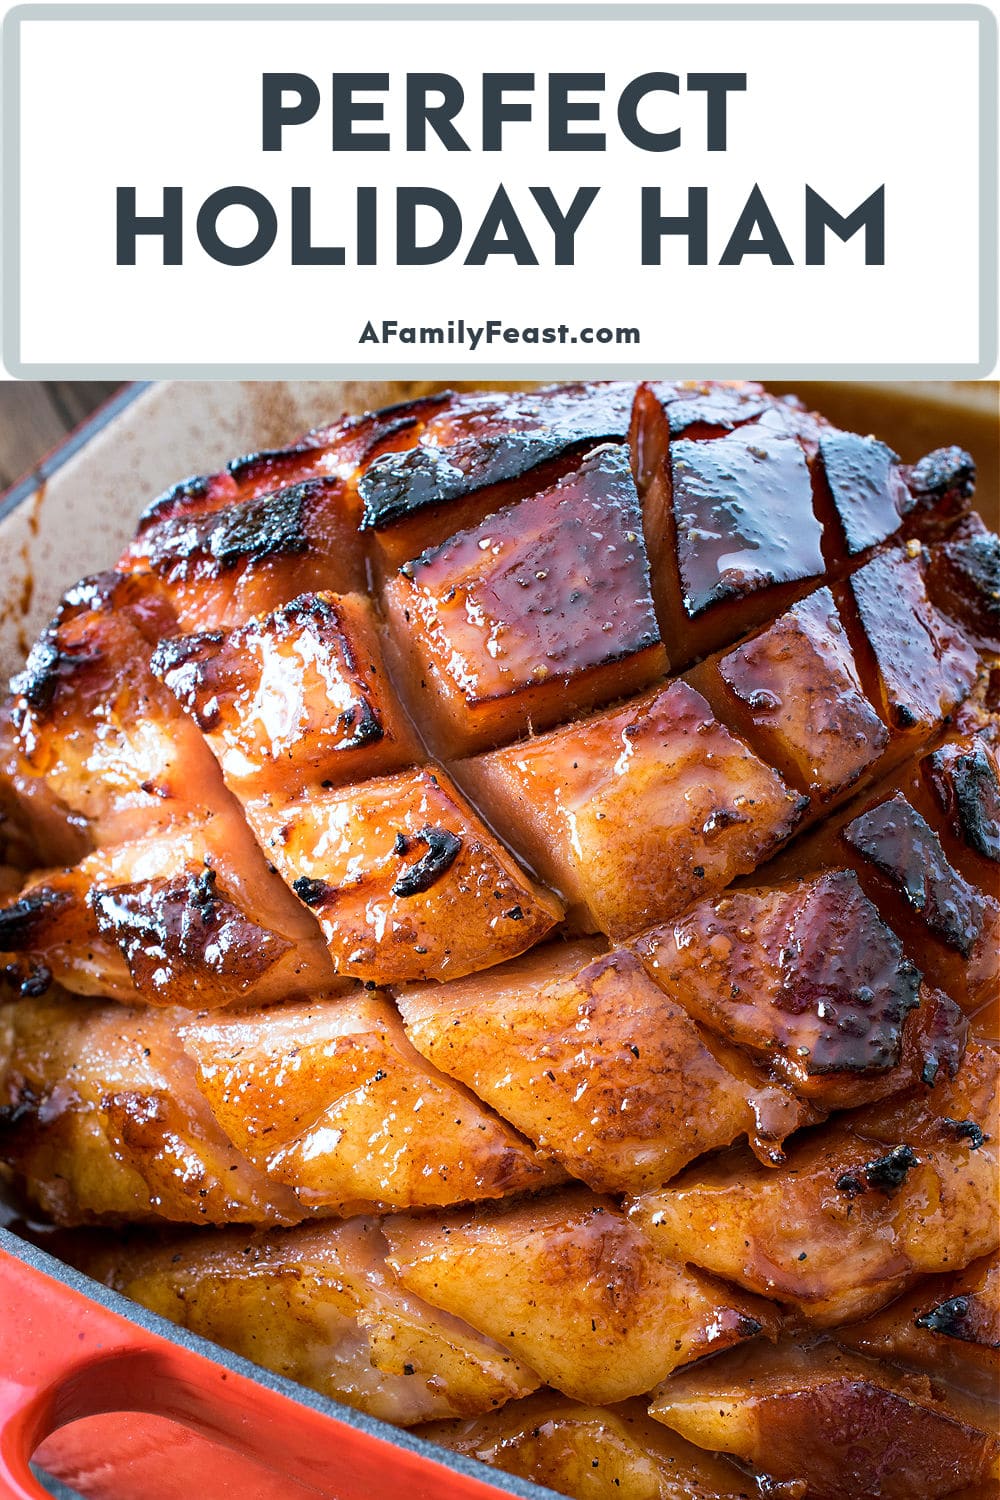 Perfect Holiday Ham - A Family Feast